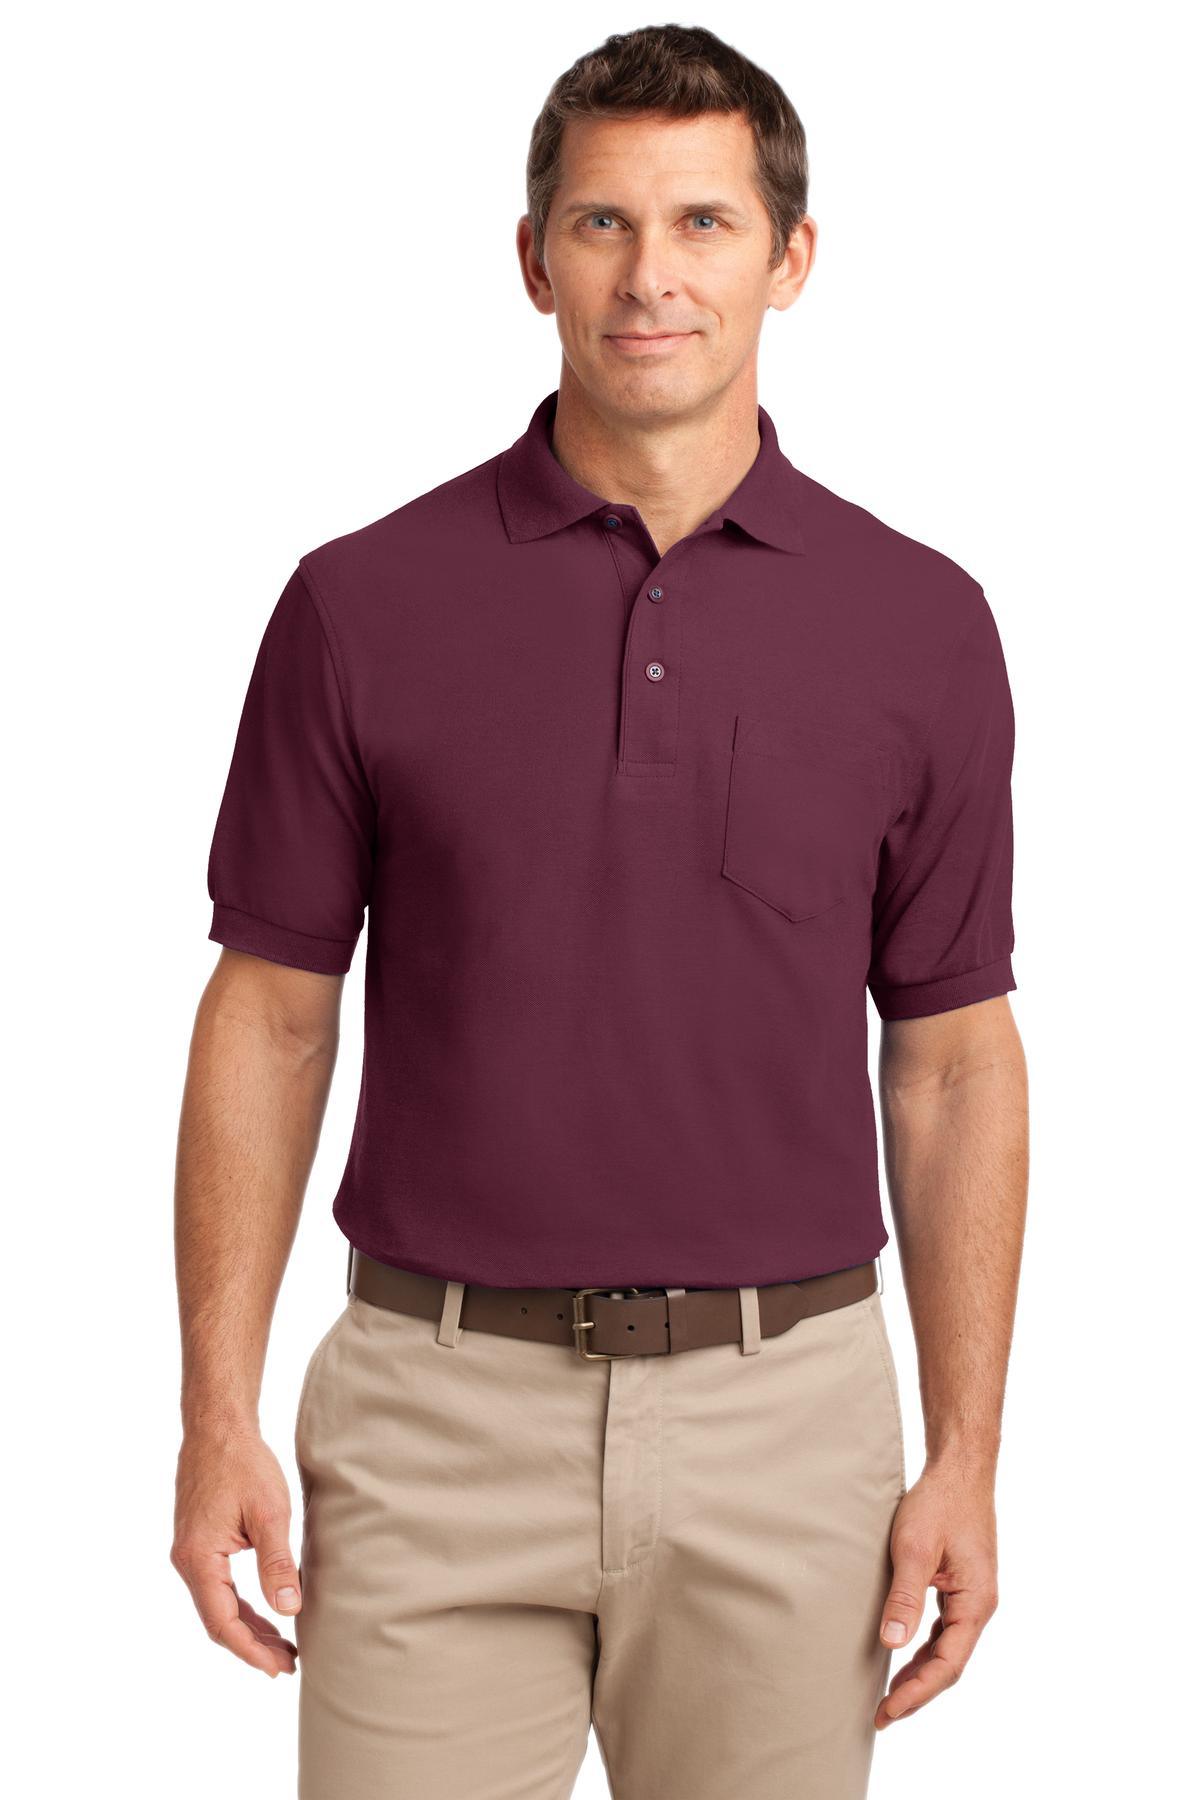 Port Authority Silk Touch Polo with Pocket. K500P - Dresses Max